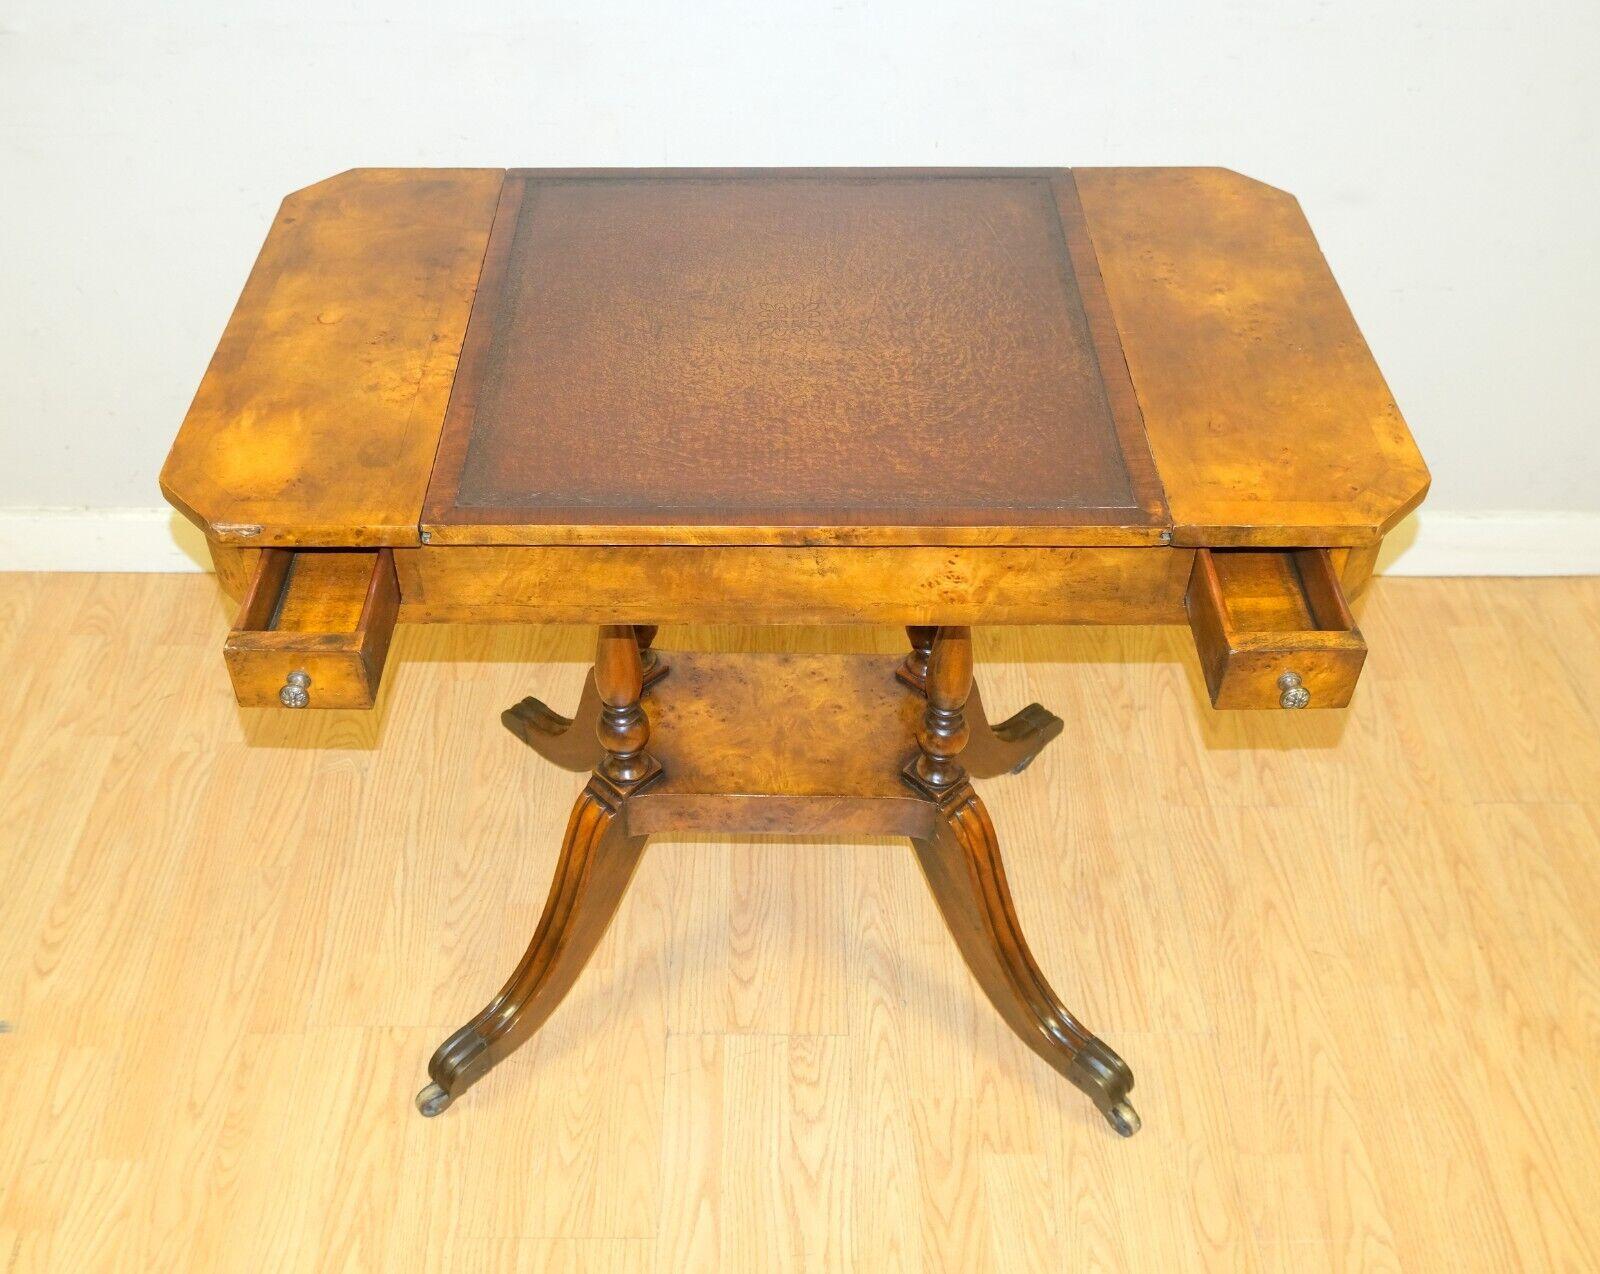 Hand-Crafted THEODORE ALEXANDER BURR WALNUT BROWN LEATHER GAME CHEDD TABLE REVERSiBLE TOP